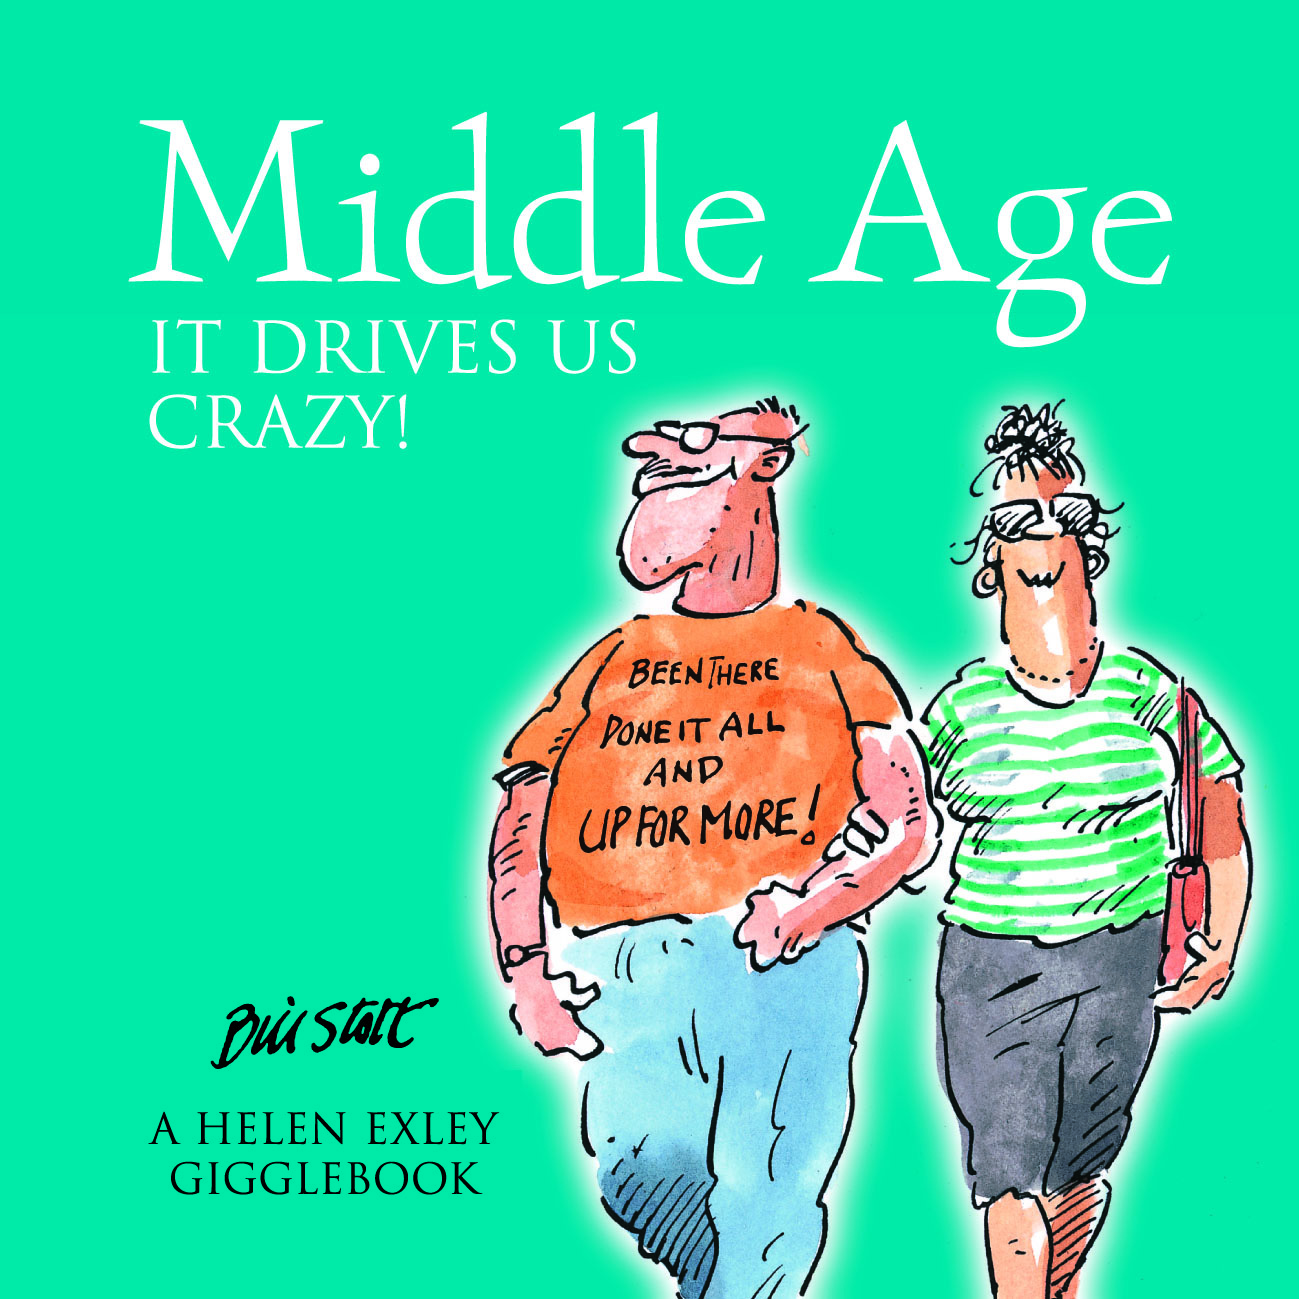 HE CRAZIES Middle Age - It drives us Crazy